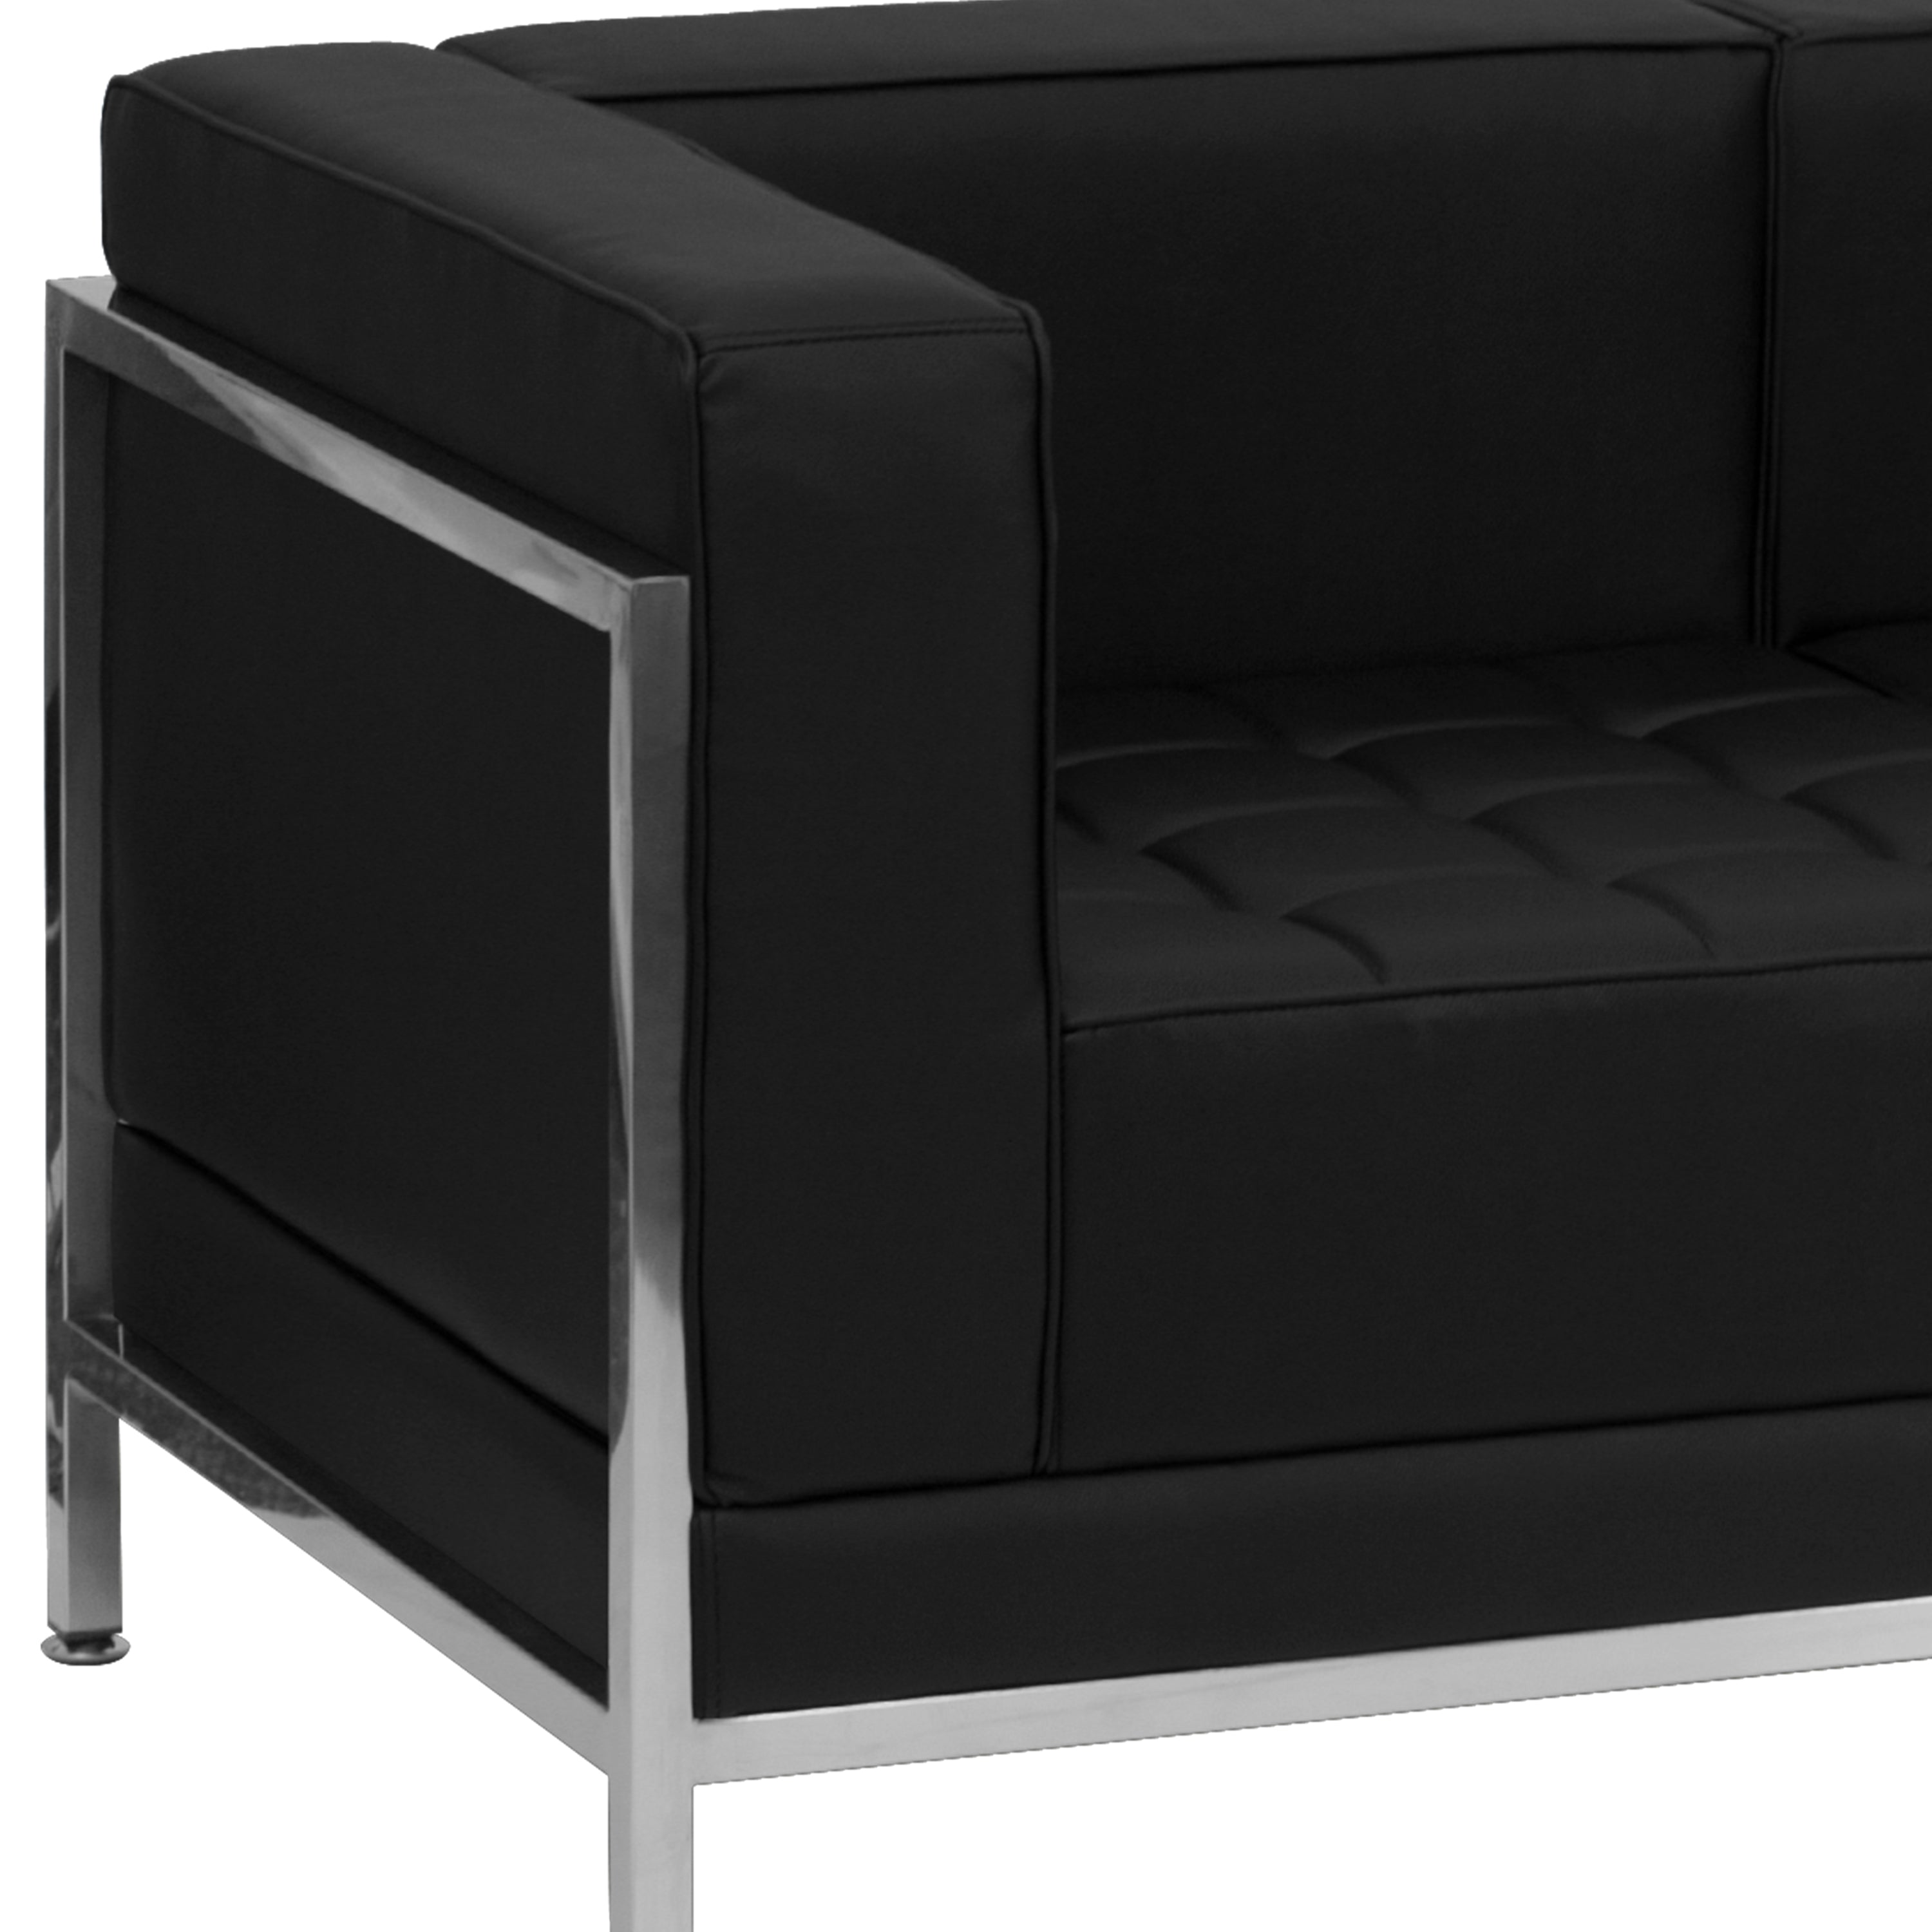 HERCULES Imagination Series Contemporary LeatherSoft Modular Loveseat with Quilted Tufted Seat and Encasing Frame-Modular Reception Loveseat-Flash Furniture-Wall2Wall Furnishings